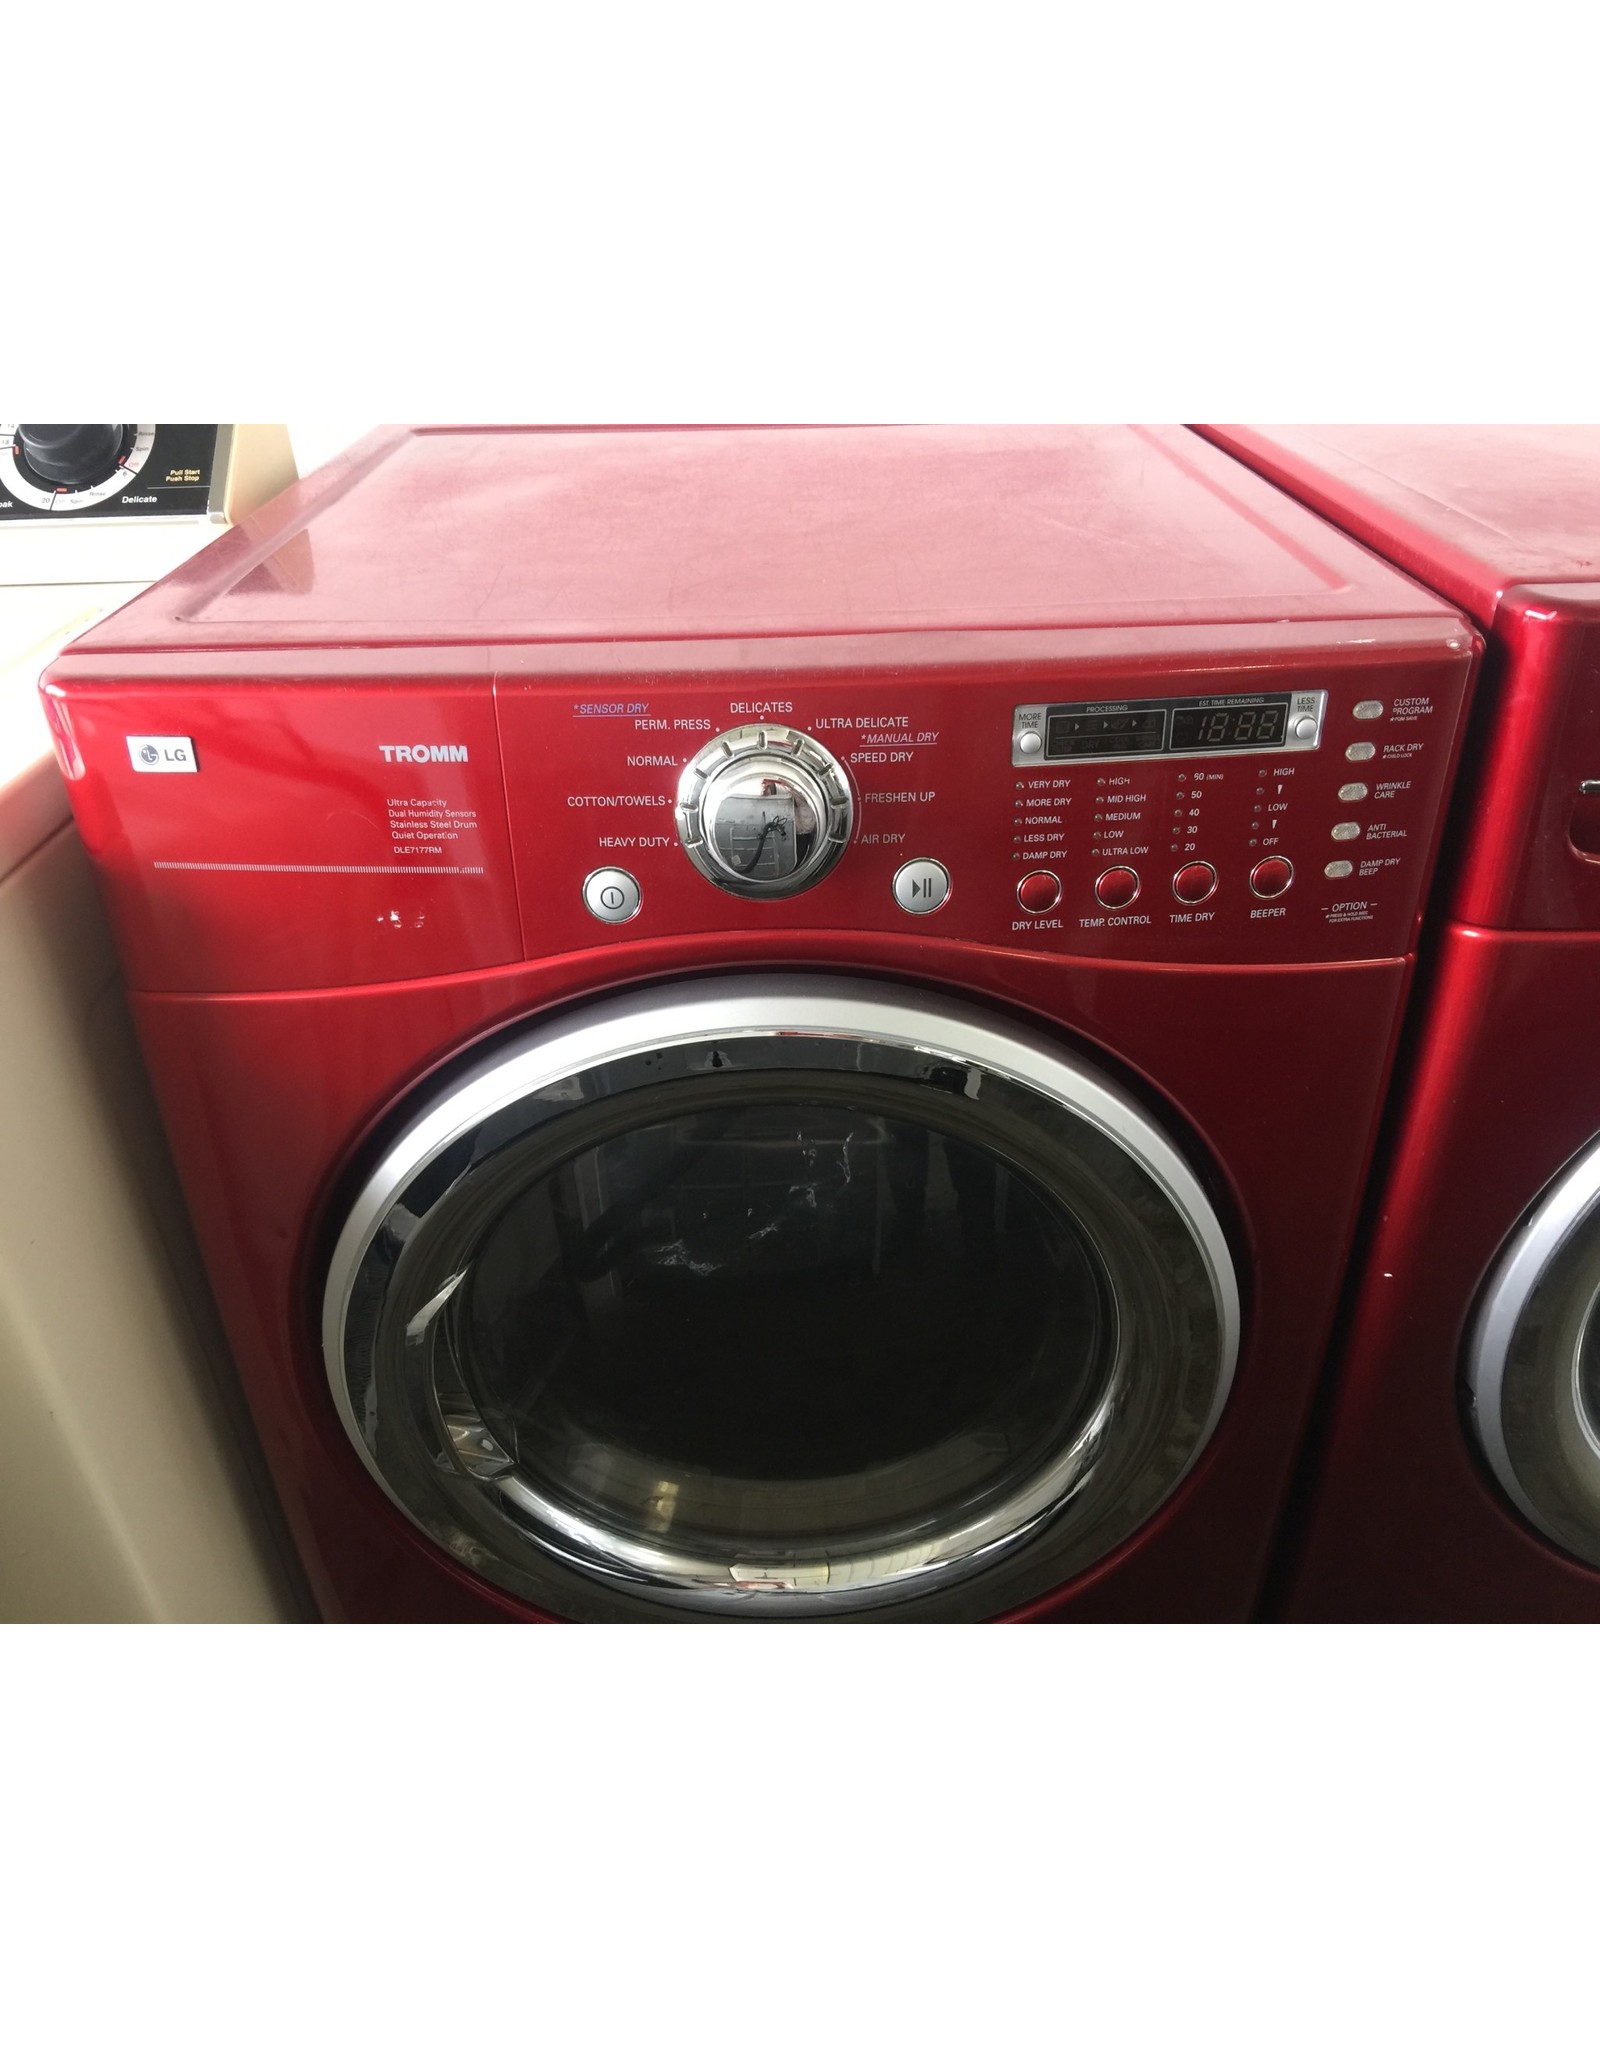 LG LG TROMM FRONT LOAD STEAM DRYER IN RED